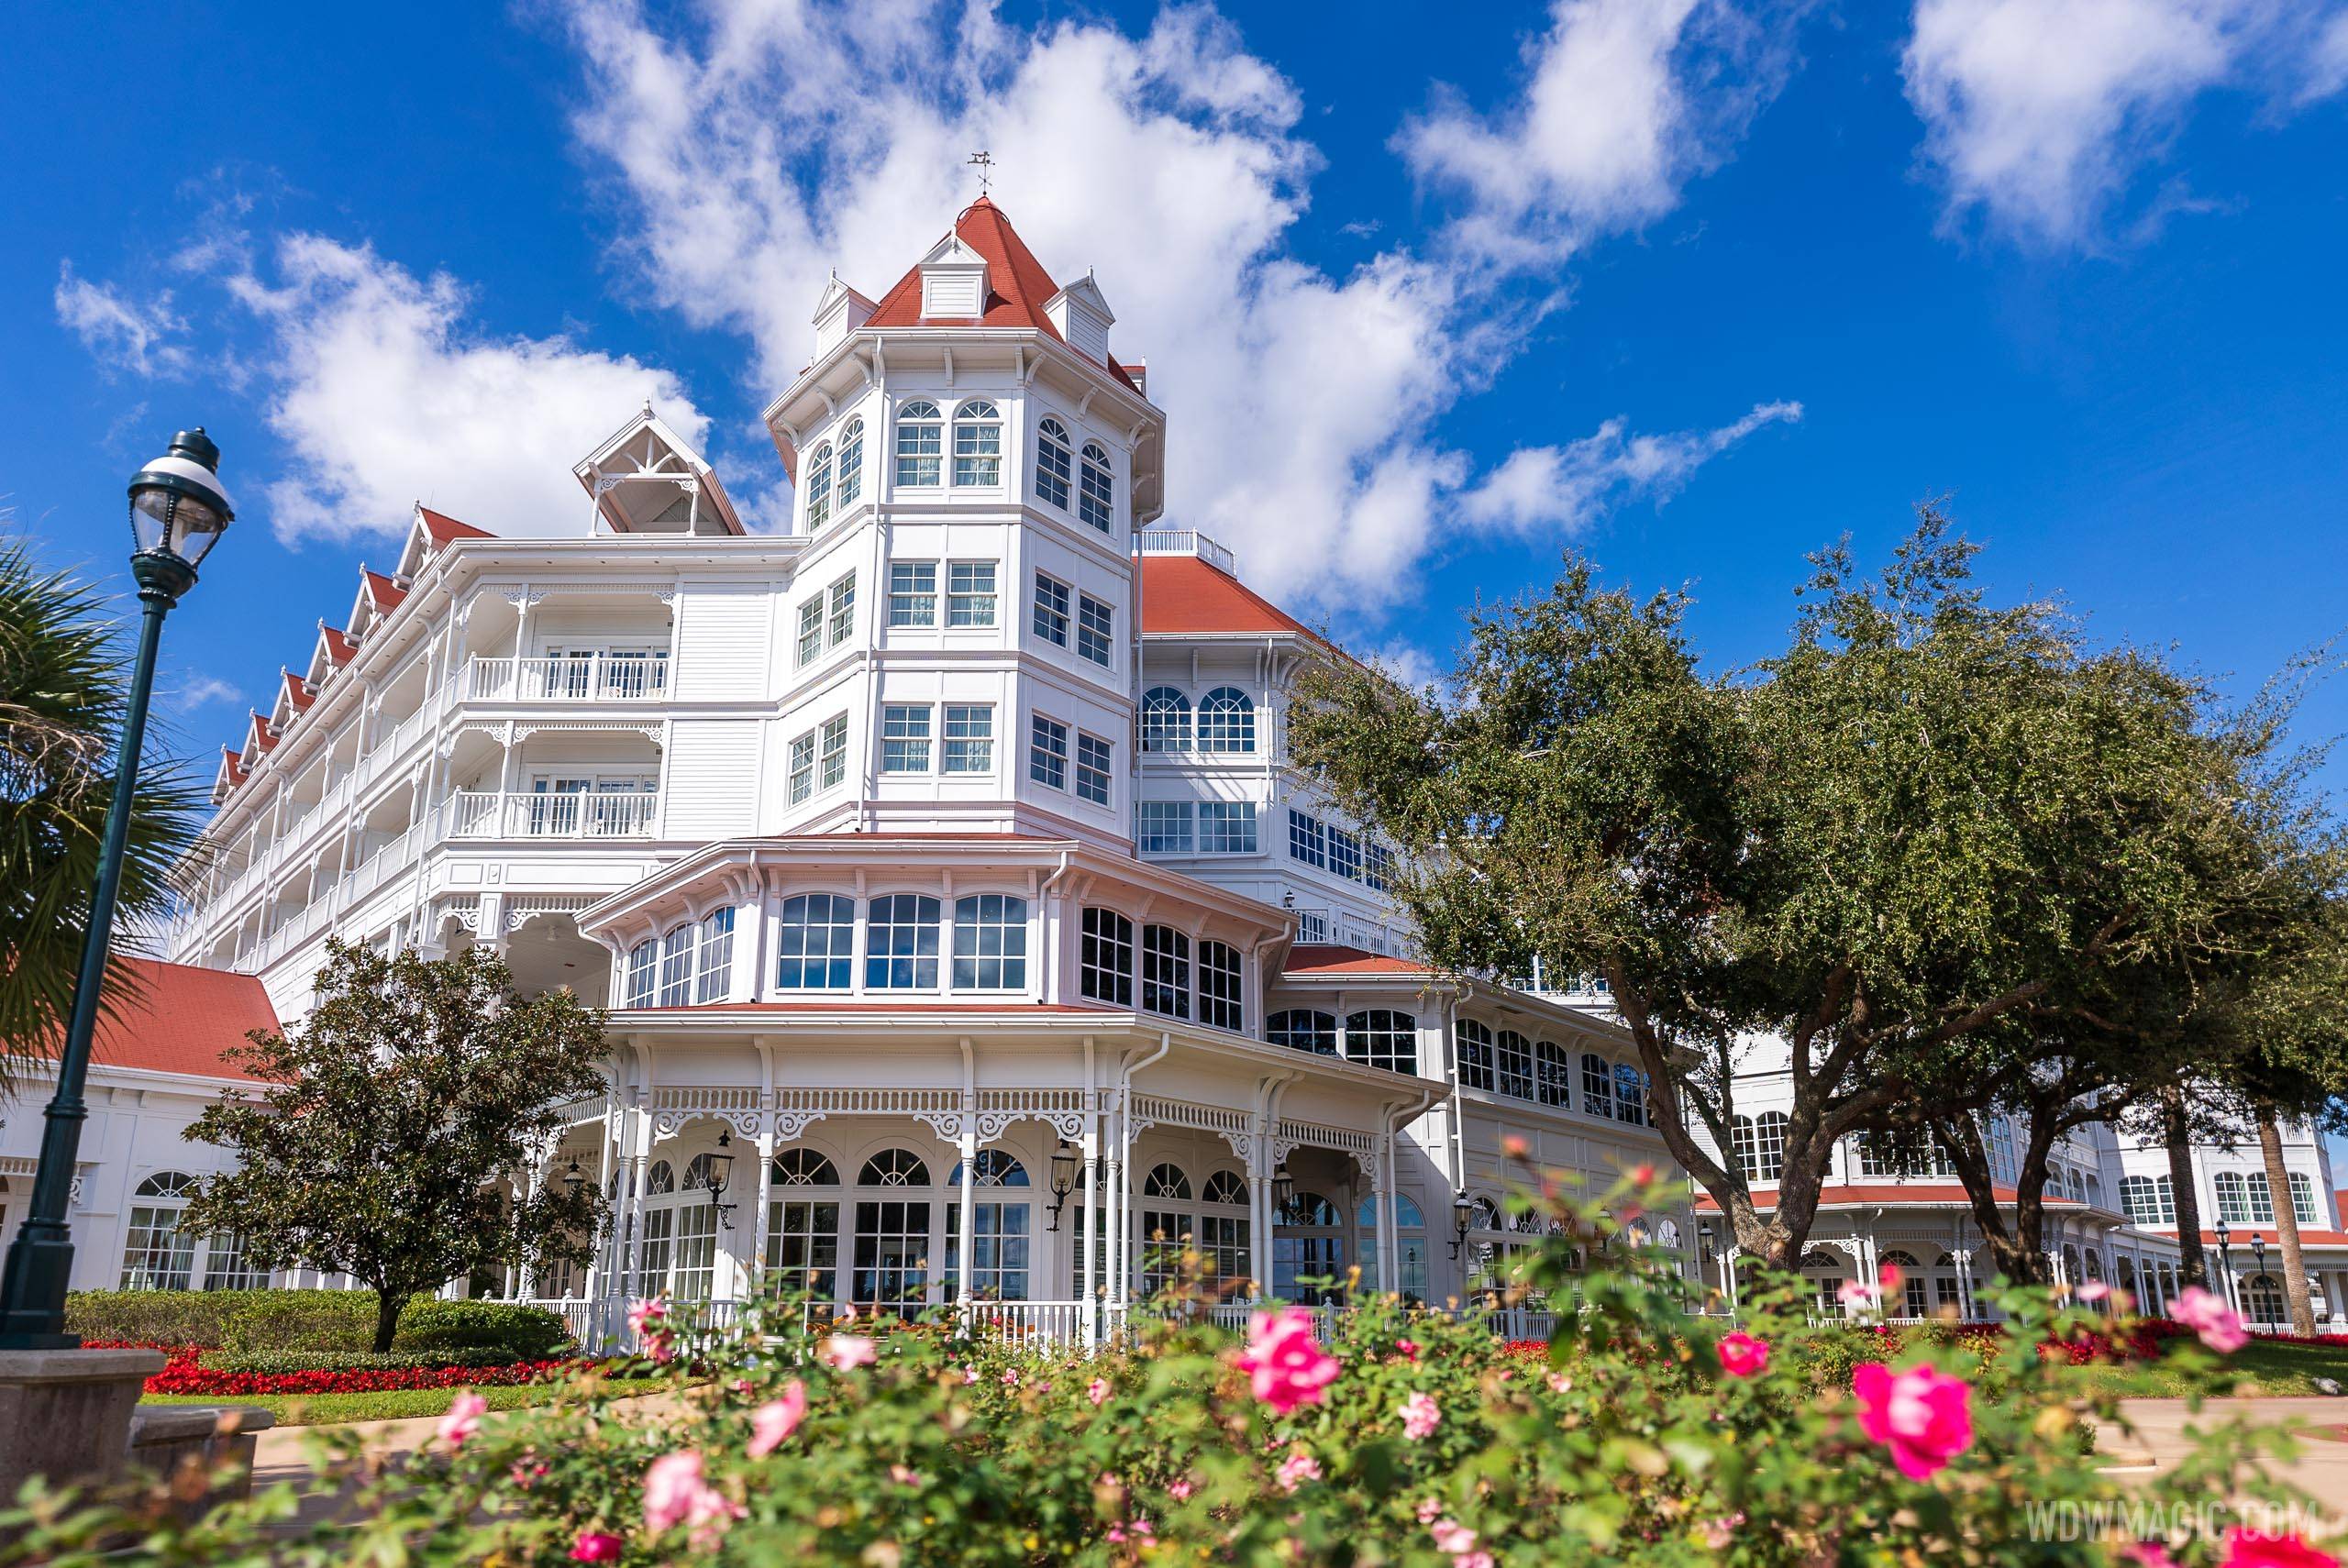 1900 Park Fare at Disney's Grand Floridian Resort offering brunch during the holiday season